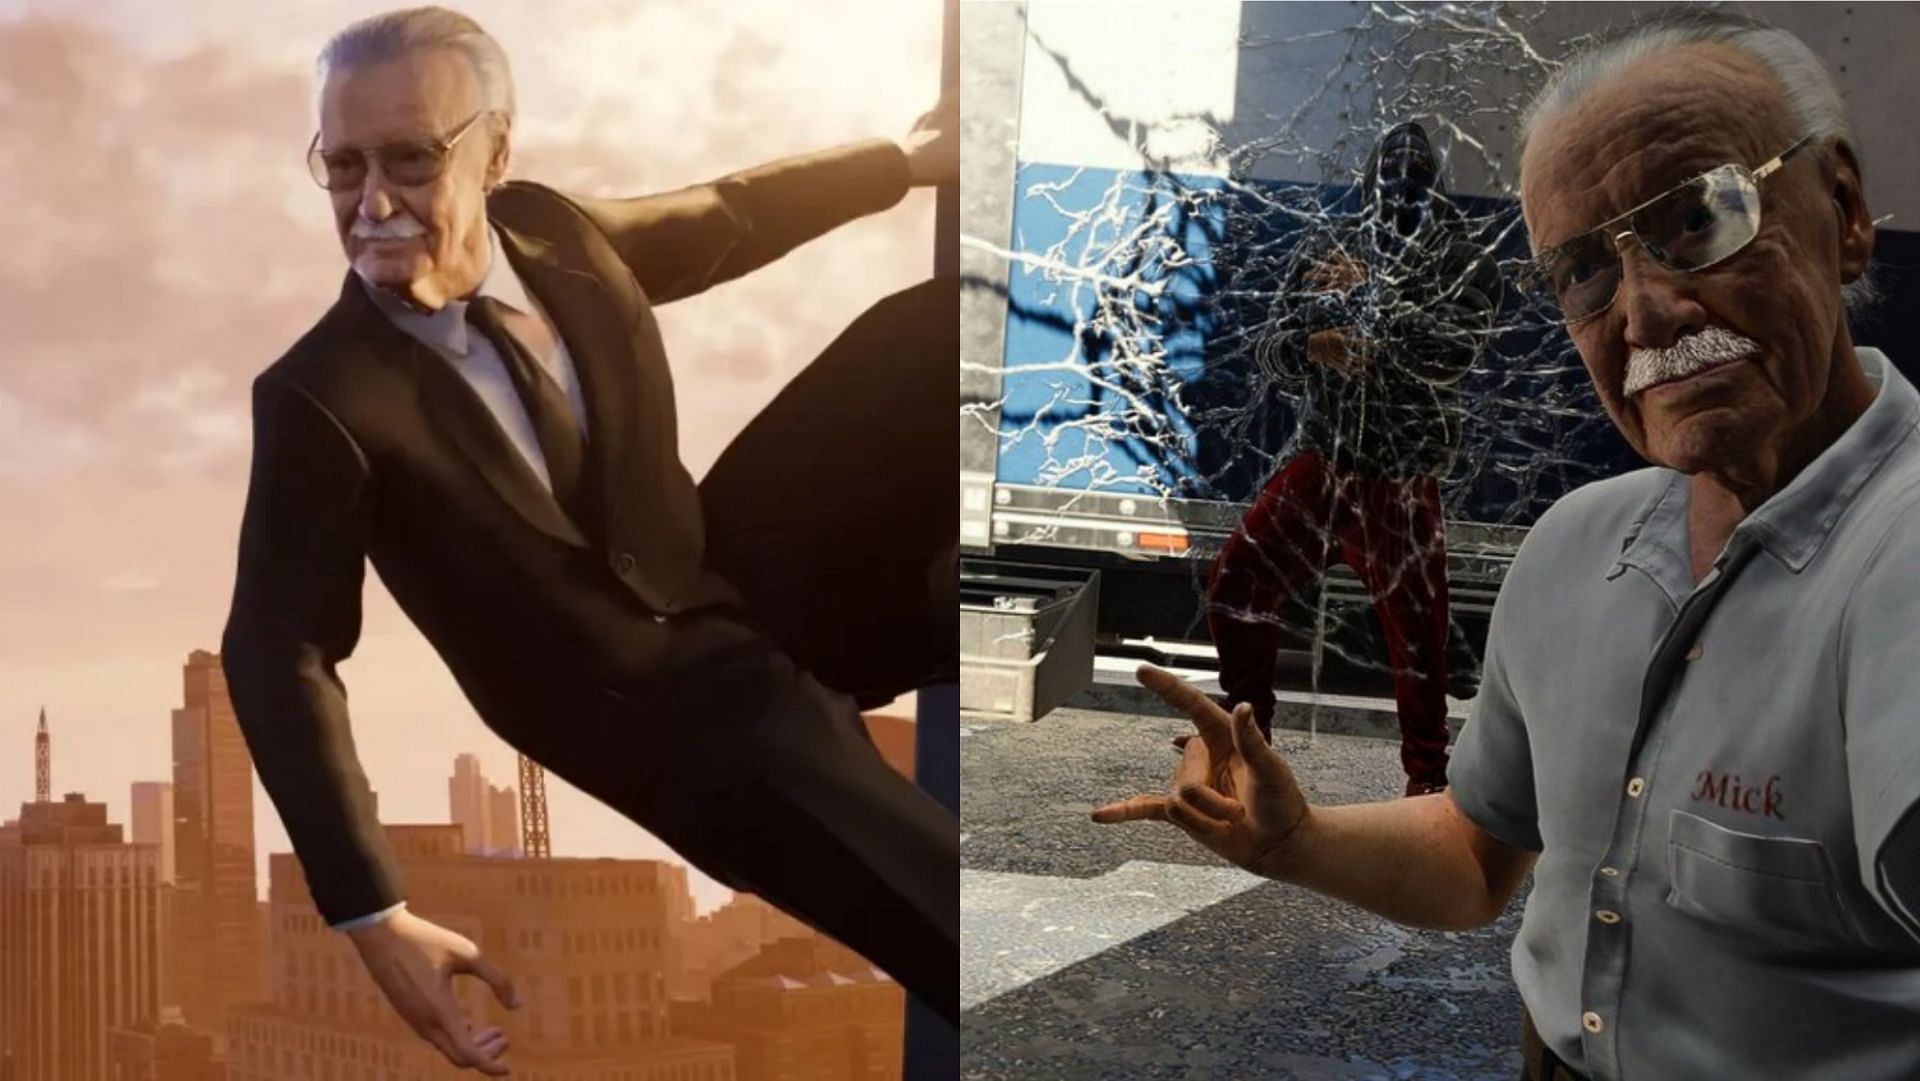 Marvel's Spider-Man PC Mod Lets You Play As Stan Lee - GameSpot